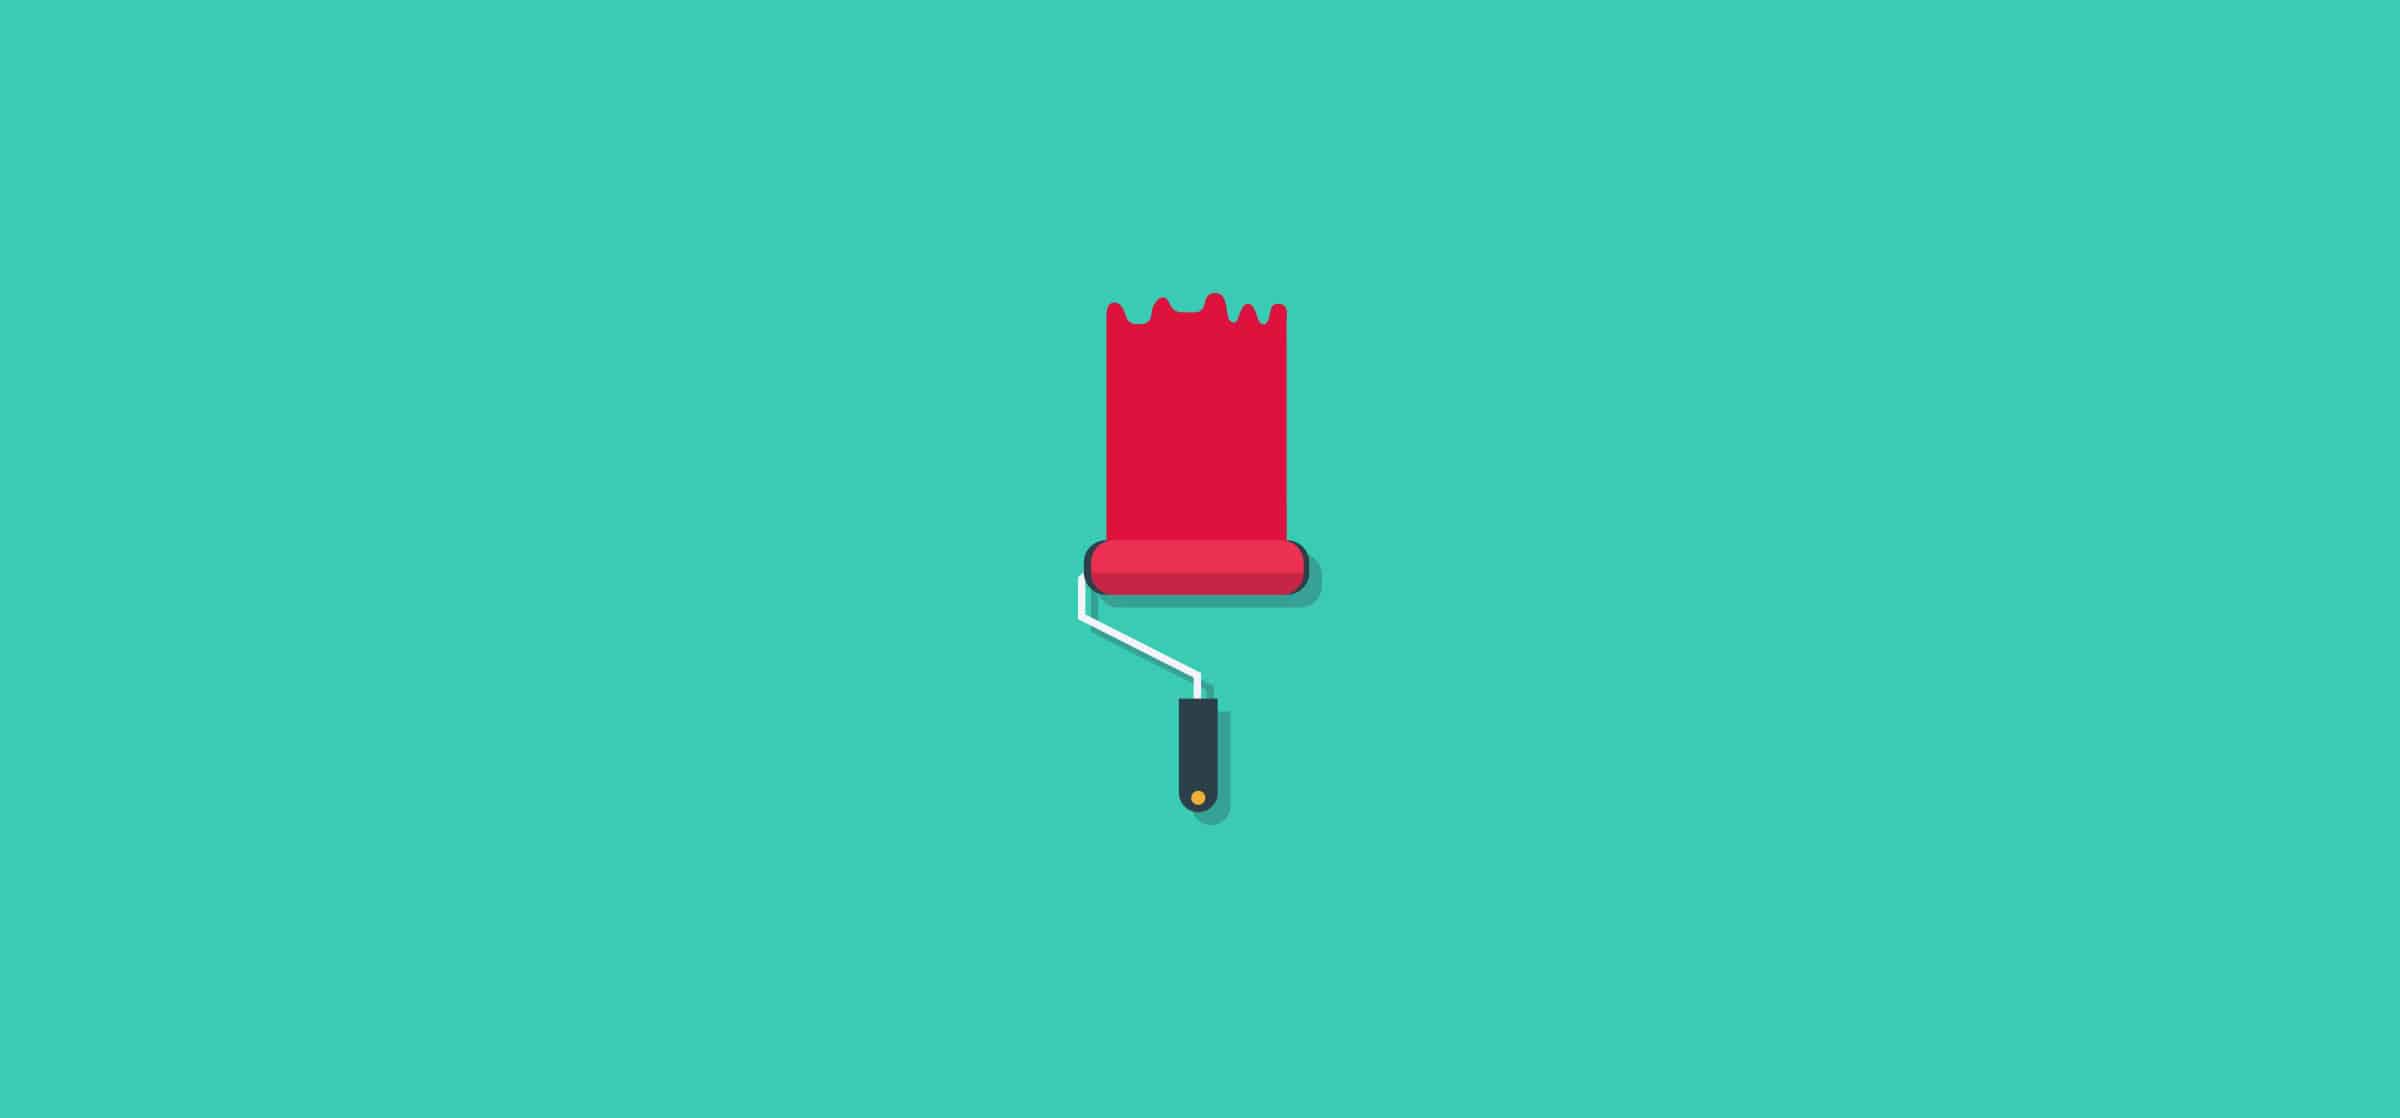 A paint roller rolling red paint onto a green background, representing the product backlog.